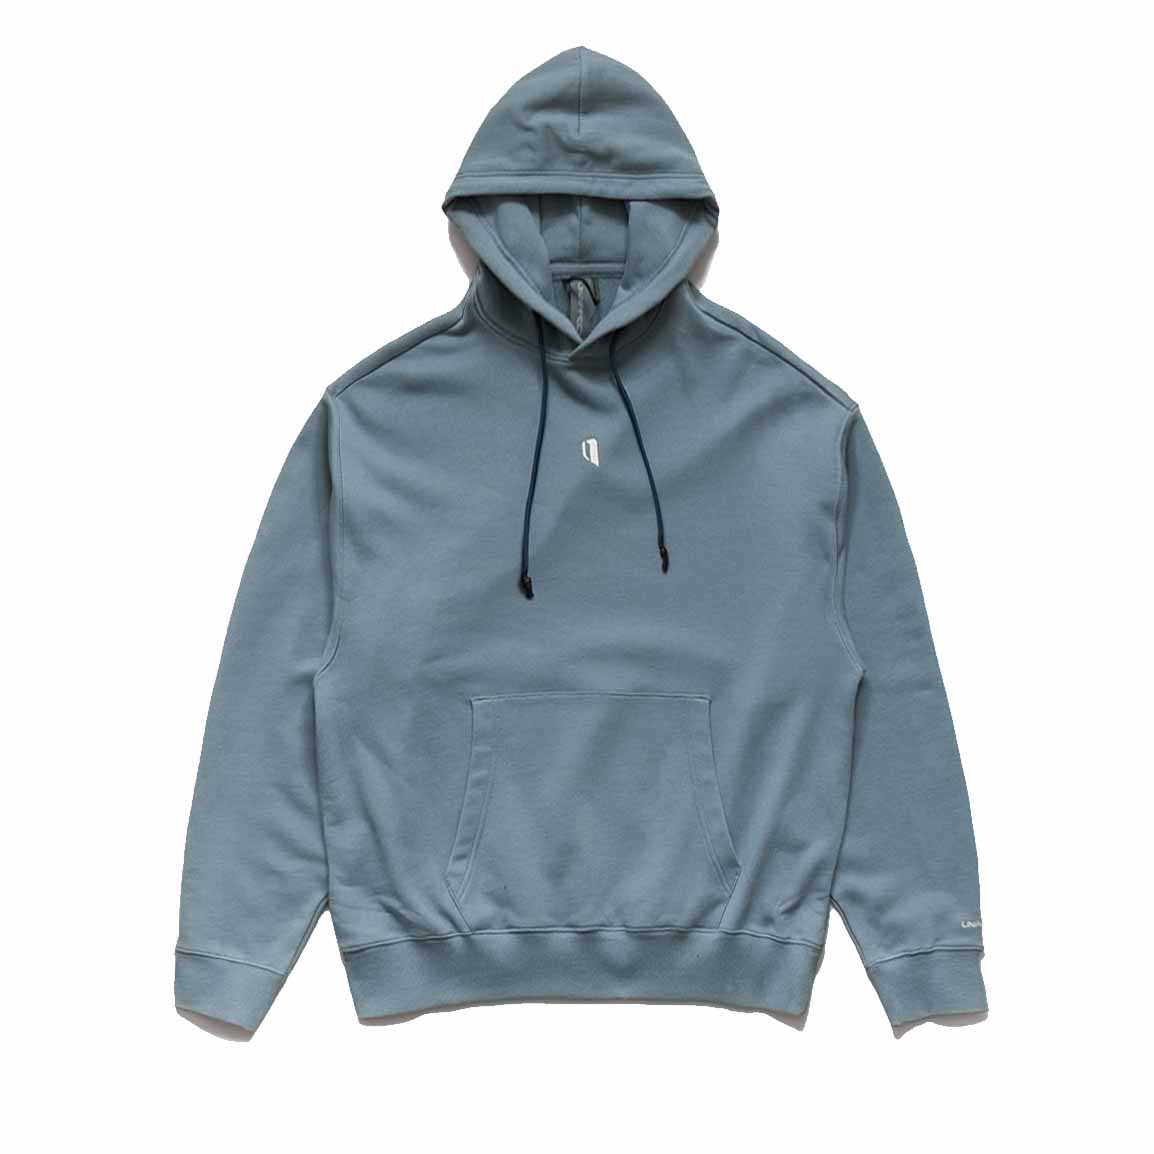 SYMBOL EMBROIDERY HOODIE SWEAT - CHARCOAL BLUE